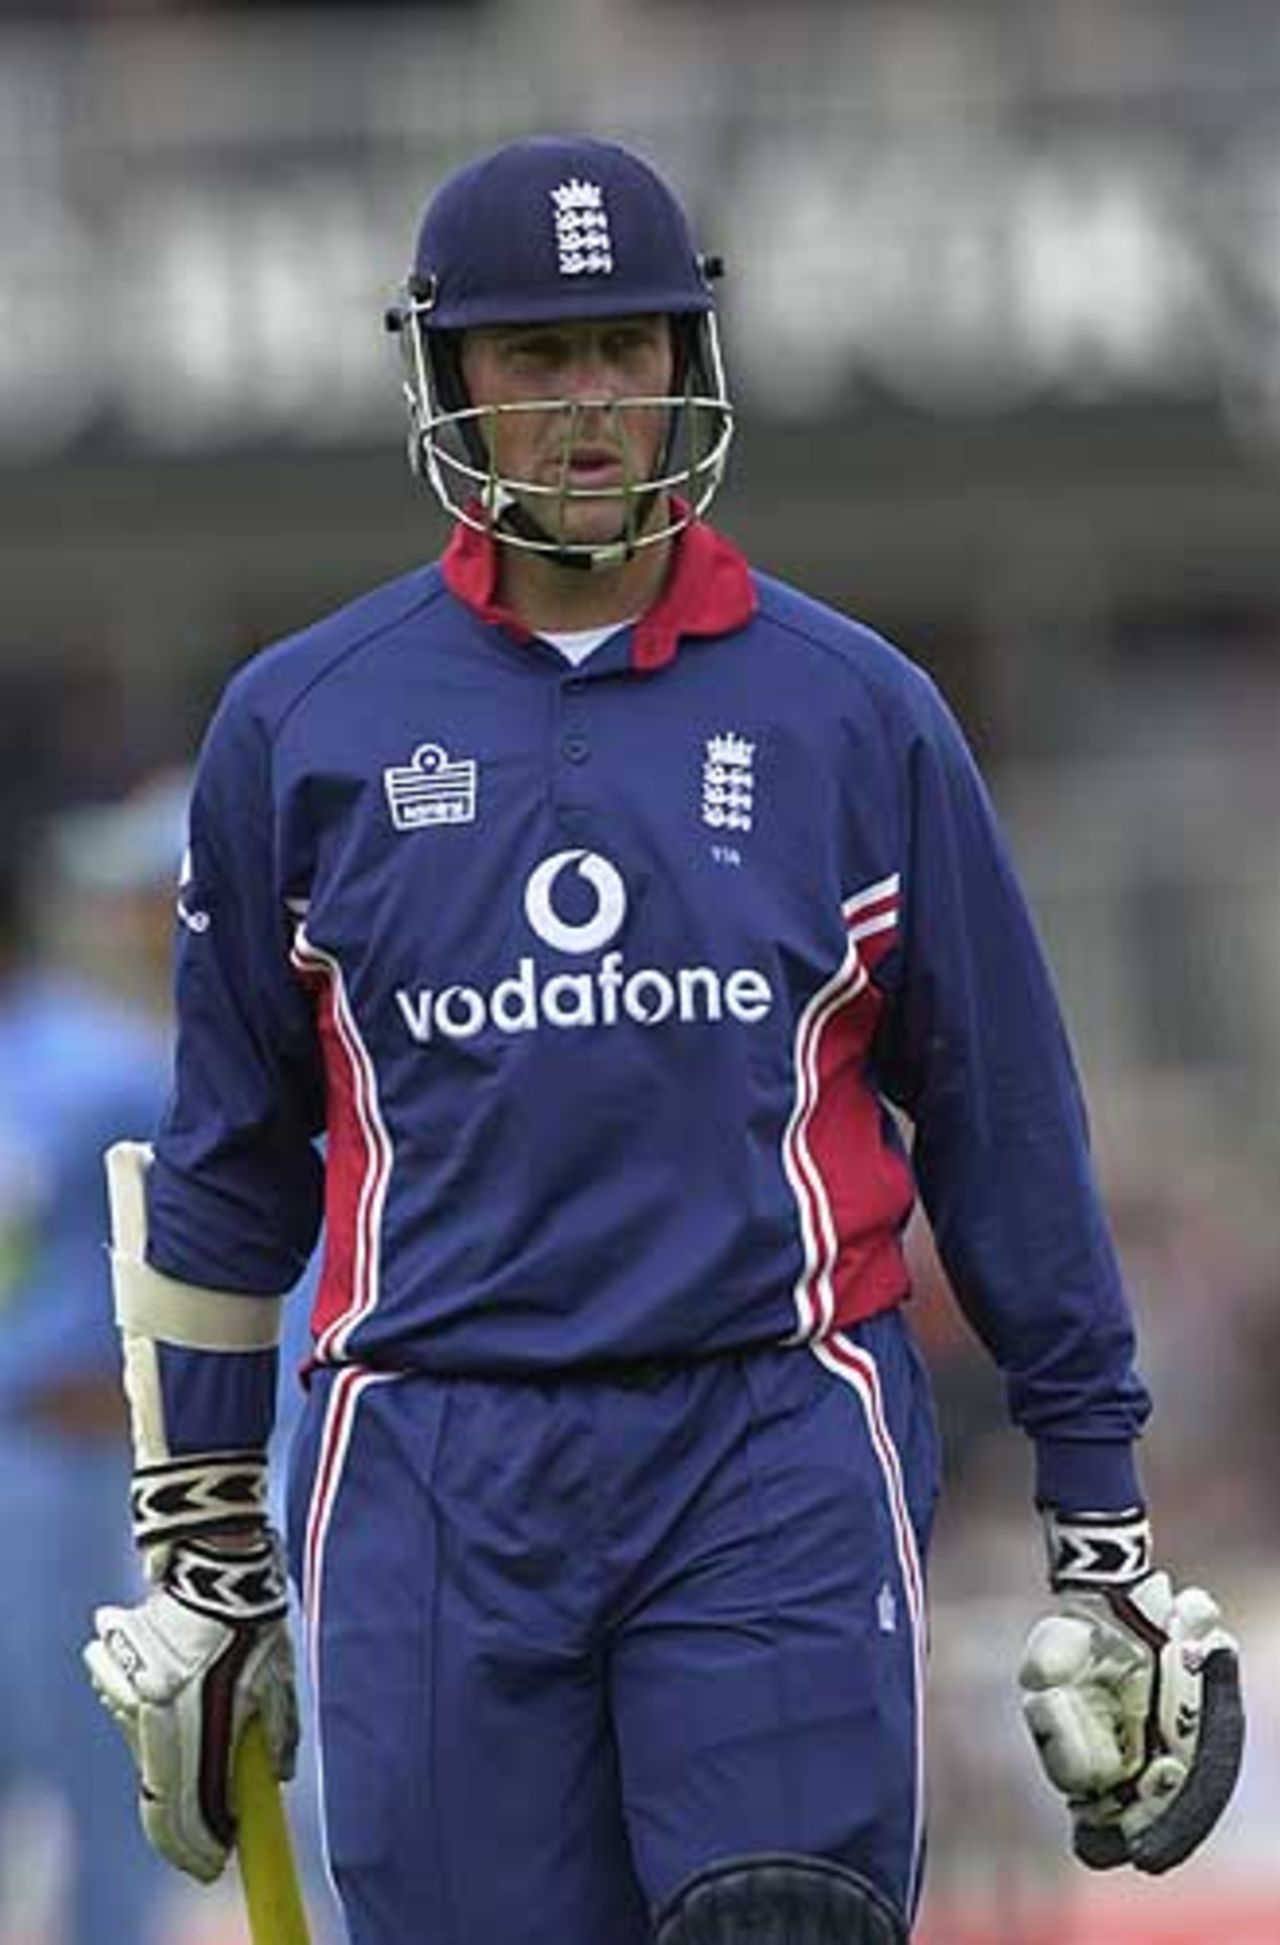 England's Trescothick looks a little sore after failing to negotiate Kumble's first ball of the match, England v India at The Oval, July 2002